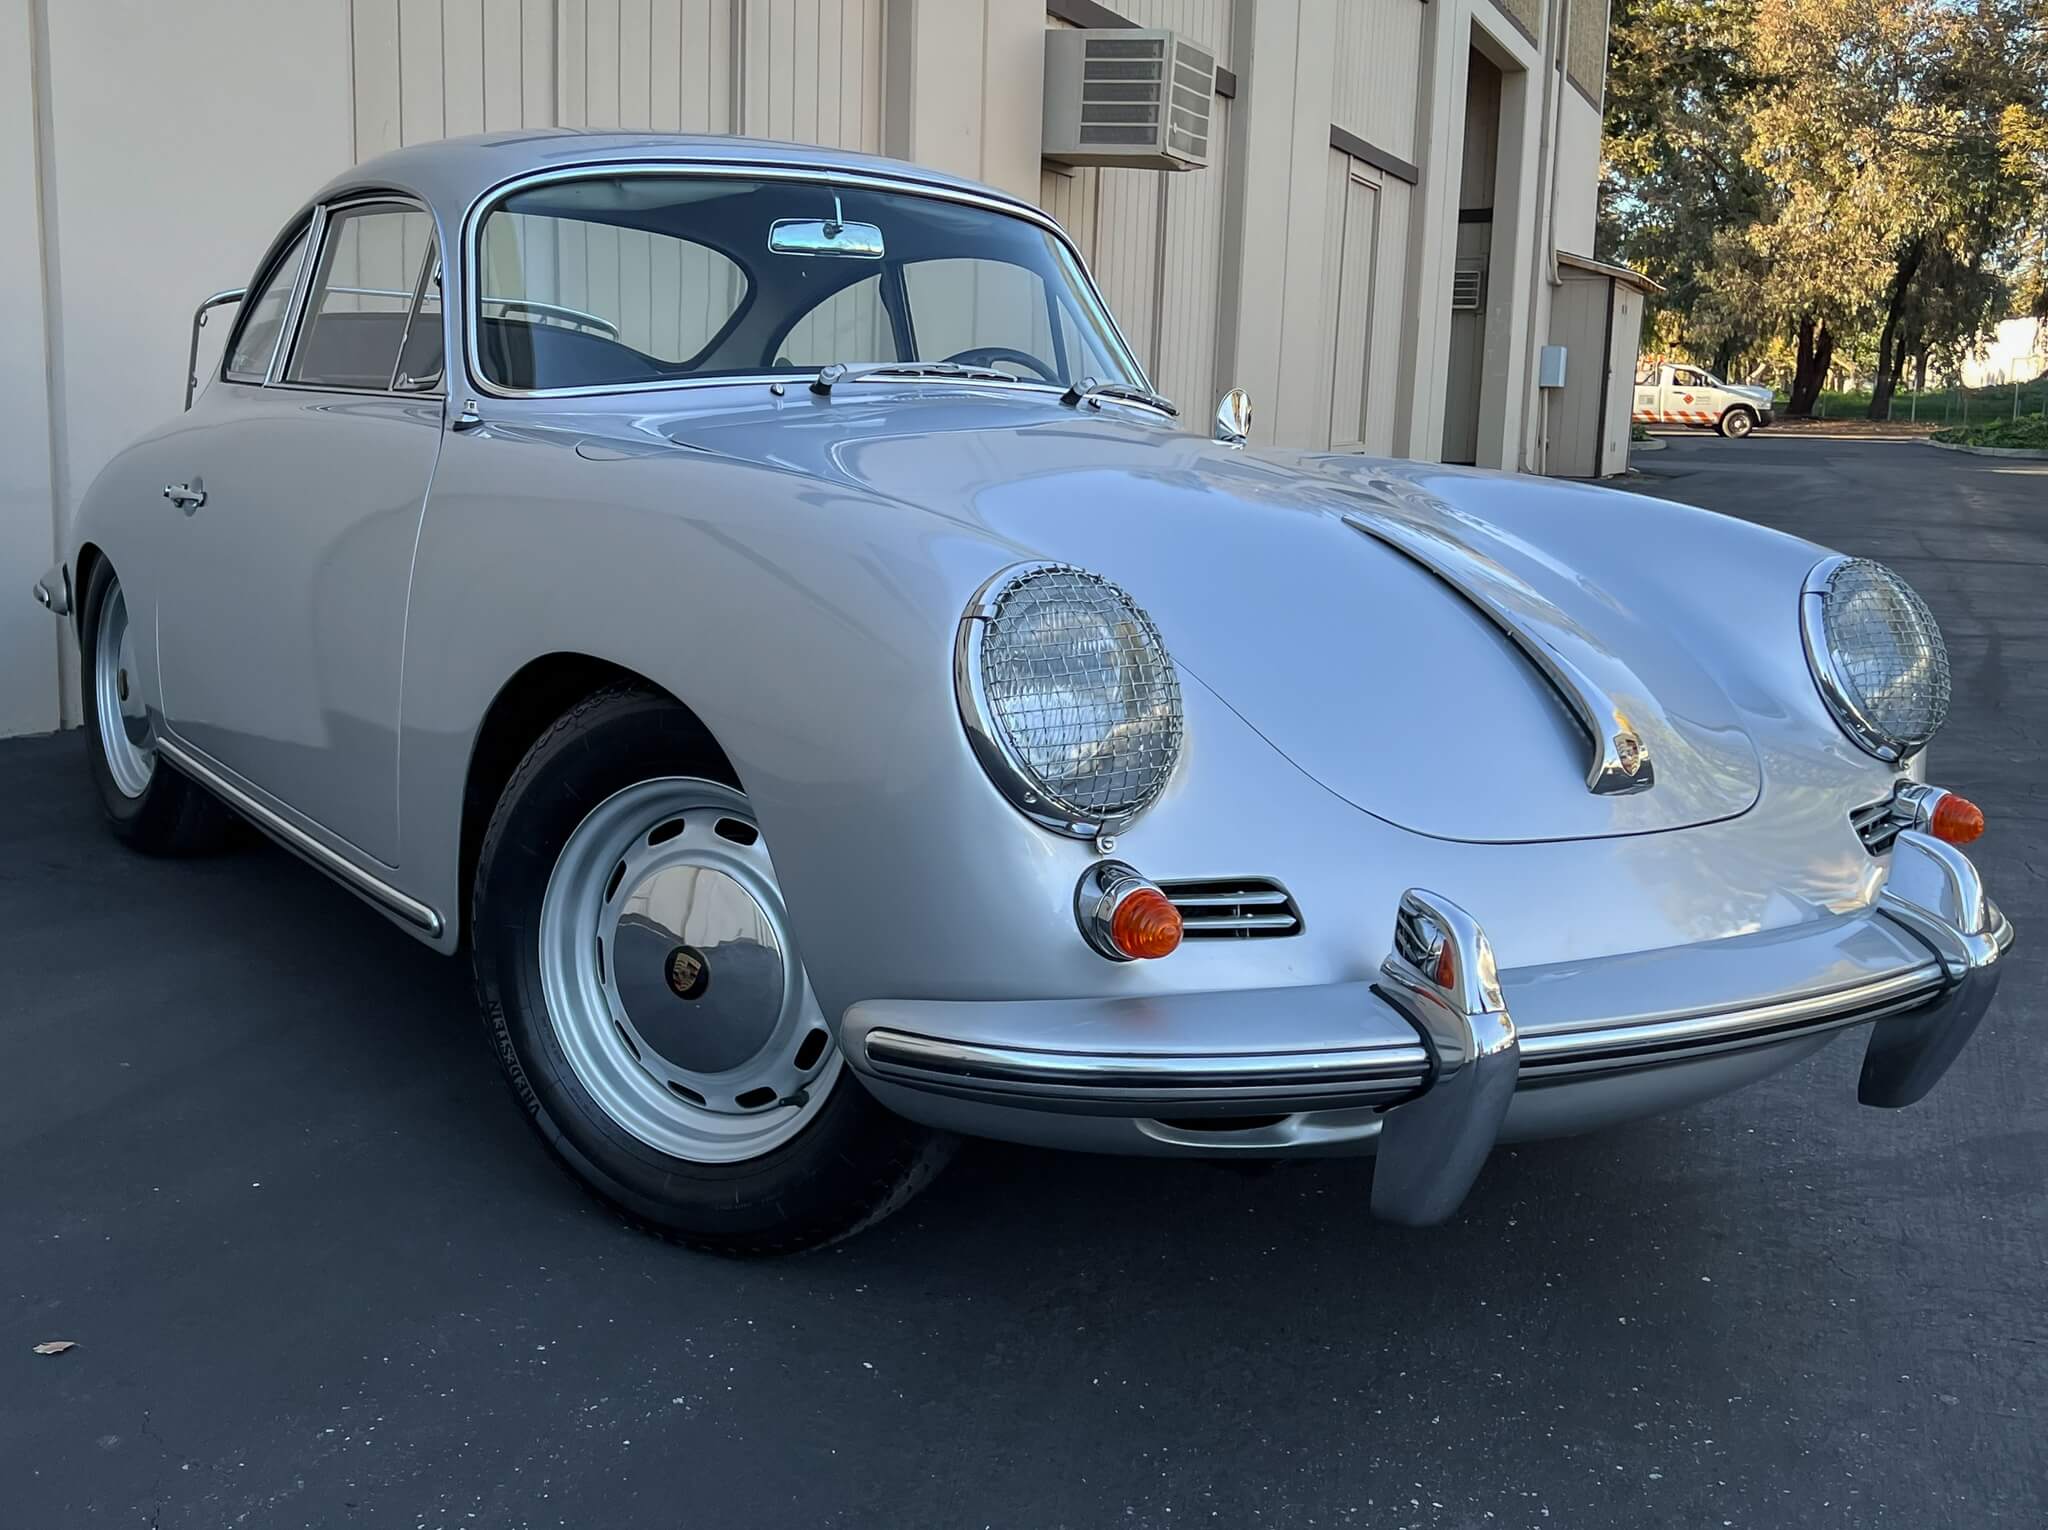  1964 Porsche 356C Coupe For Charity